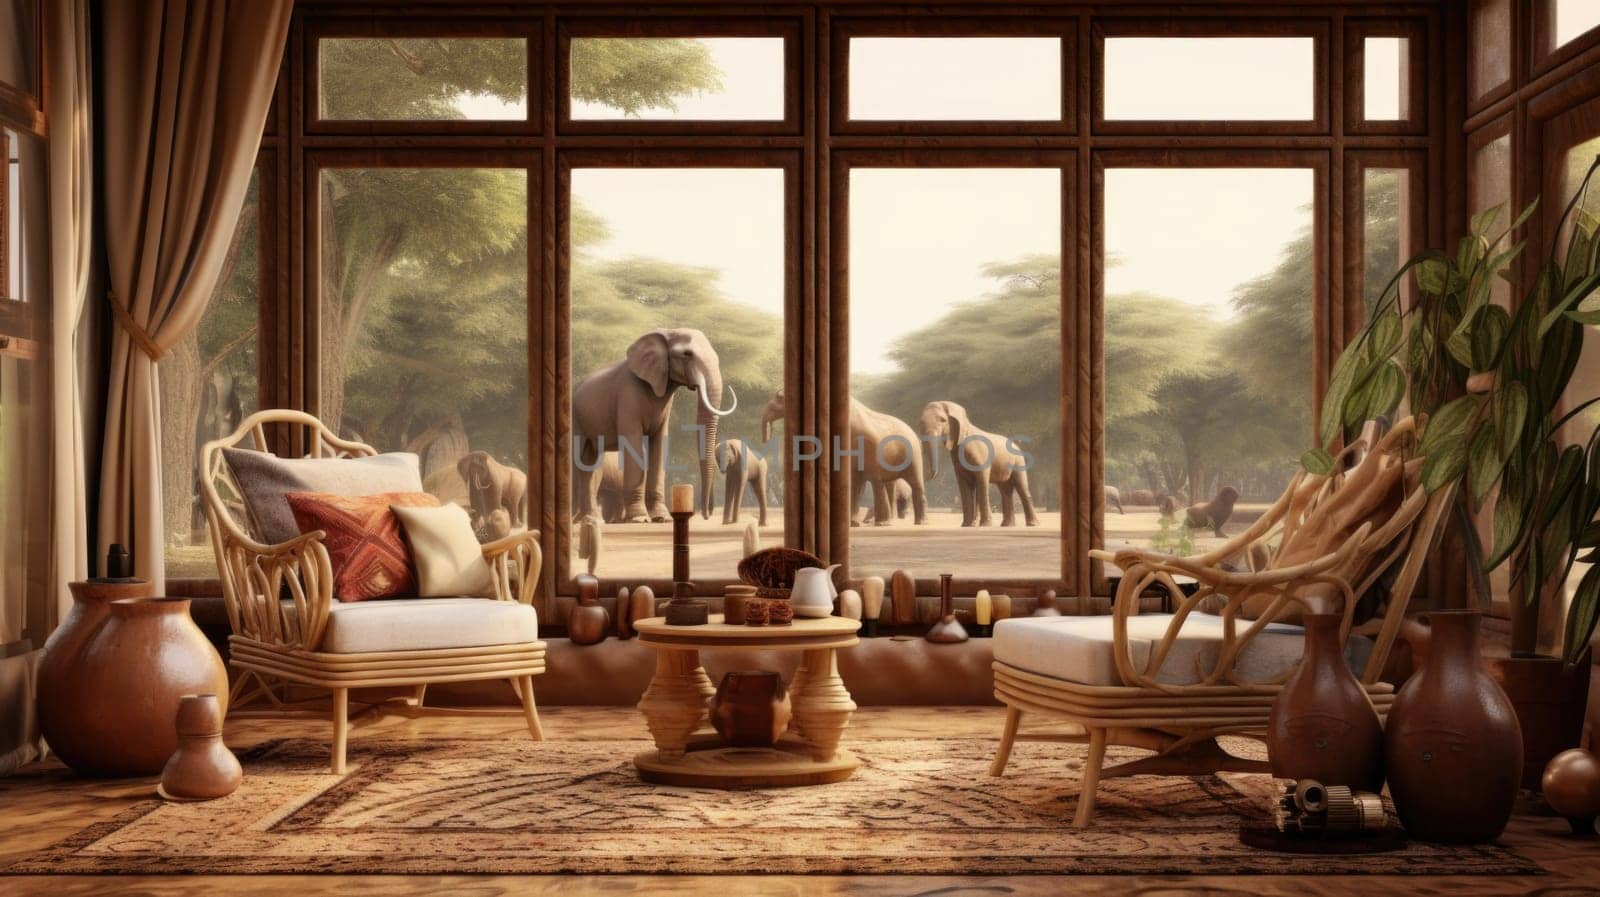 The composition of the cozy interior of the living room in an African style with a large window on the background of savannah and animals.